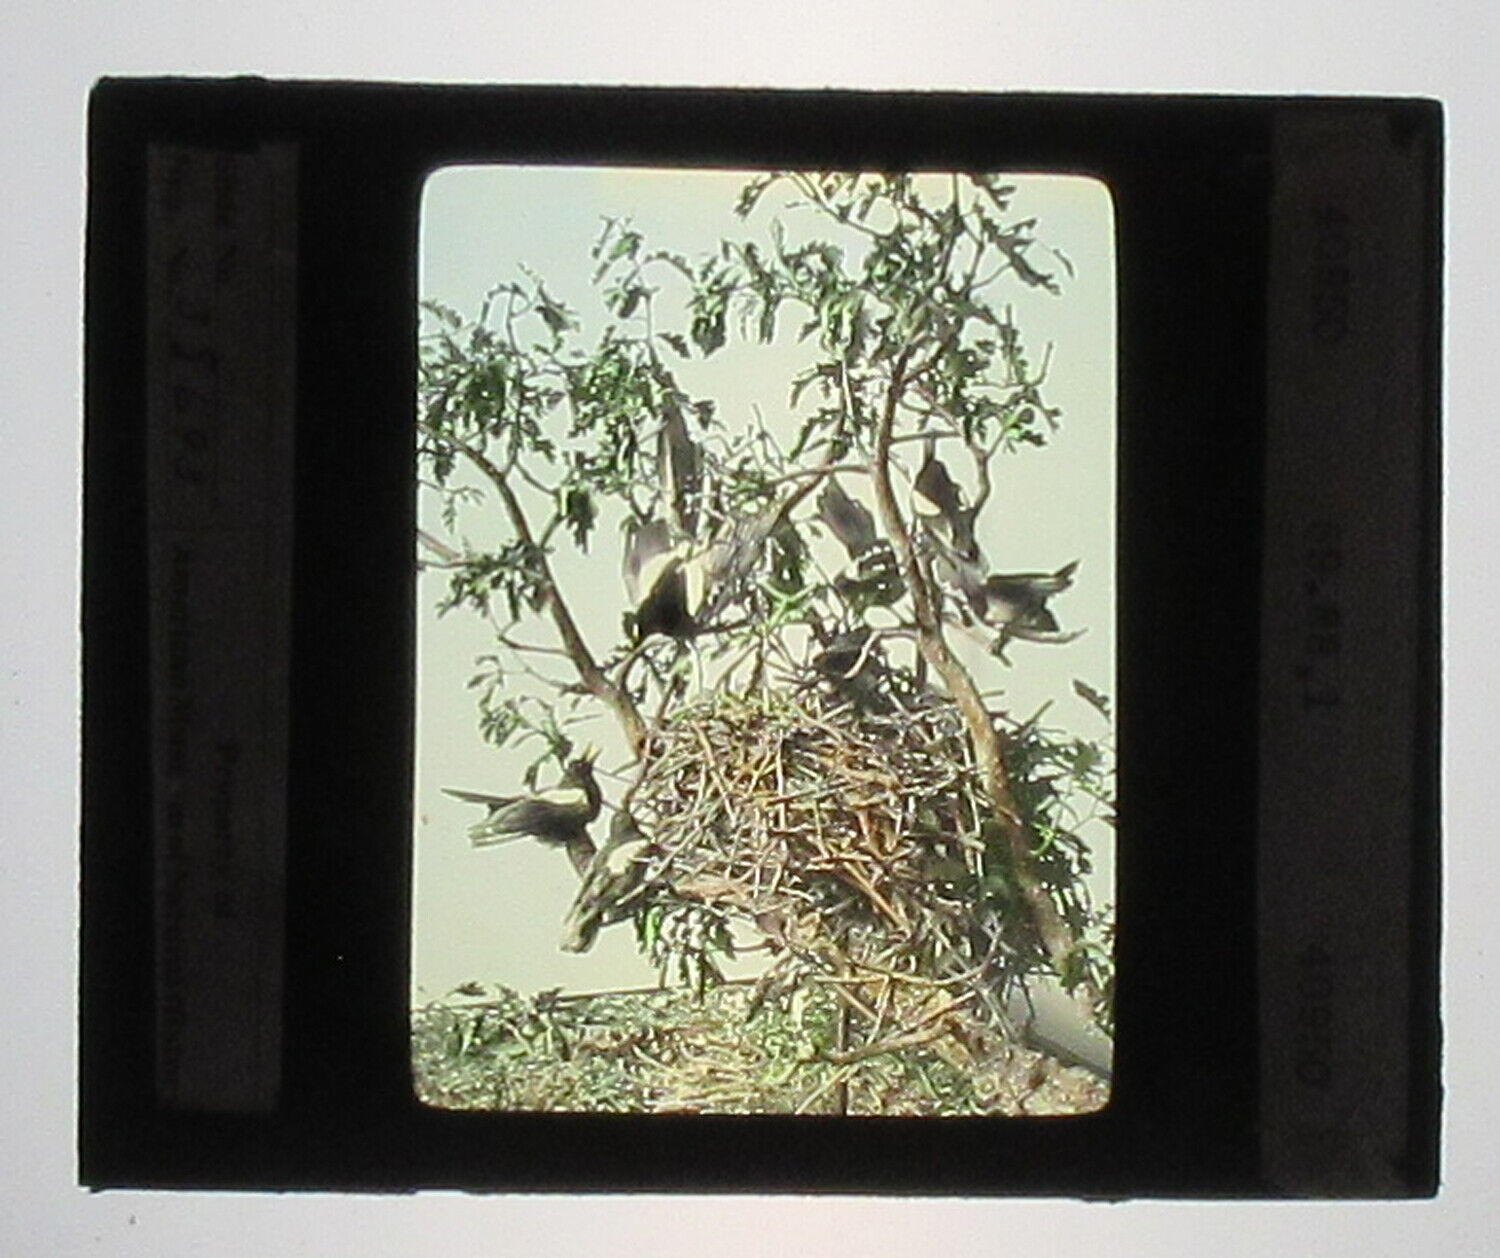 YELLOW BILLED MAGPIE. HAND COLORED PHOTO ON GLASS. TINTED LANTERN SLIDE.